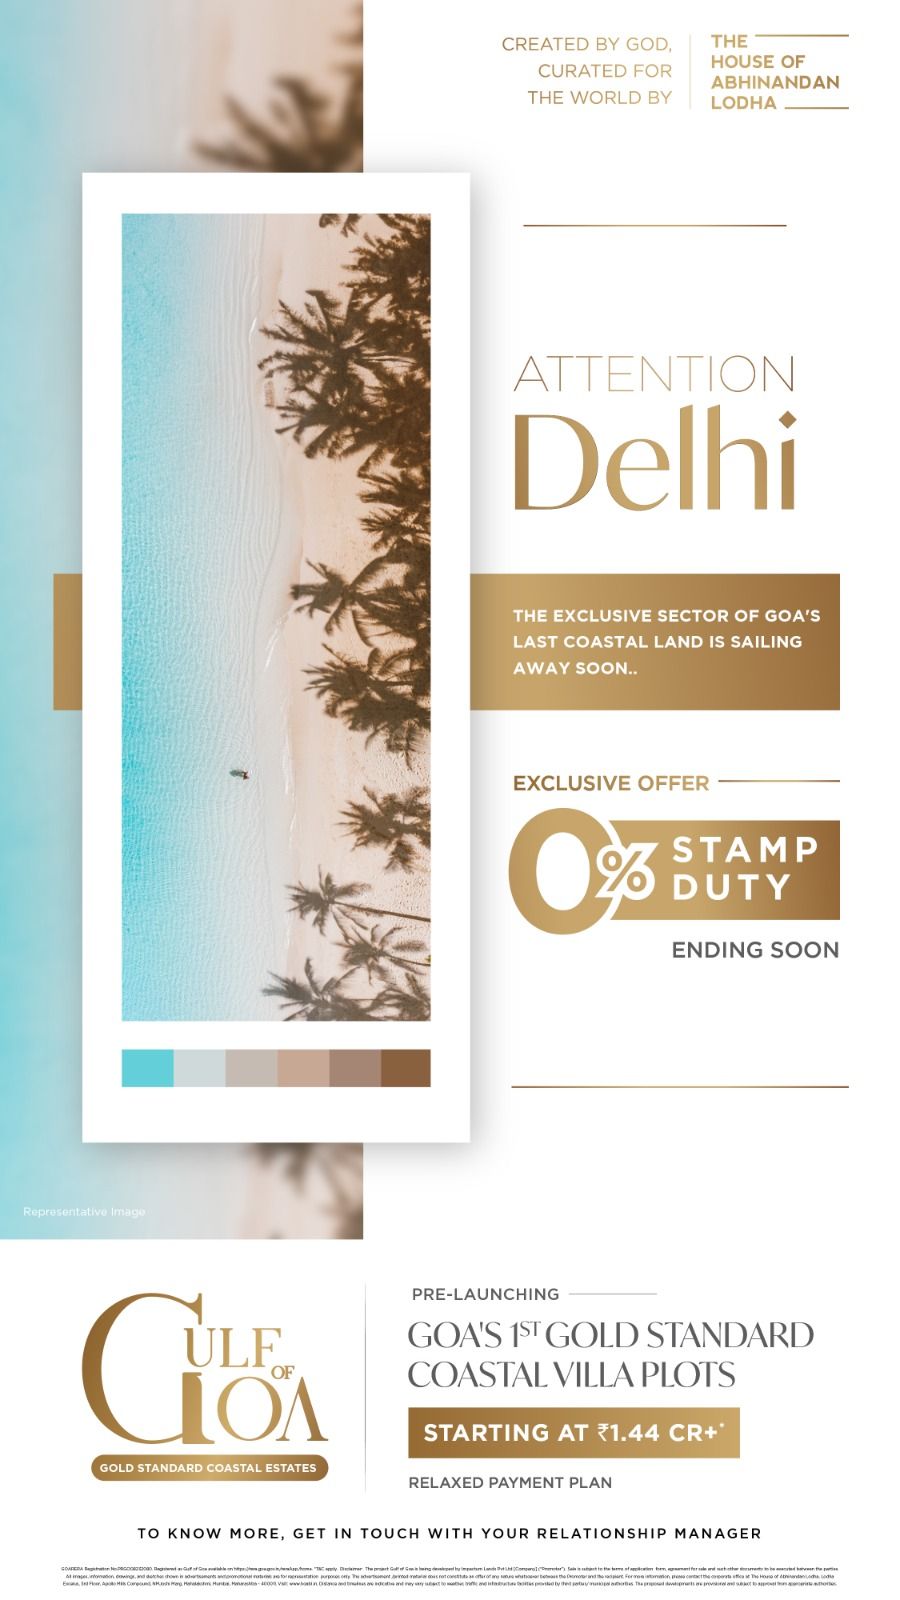 Exclusive offer 0% stamp duty at Gulf Of Goa